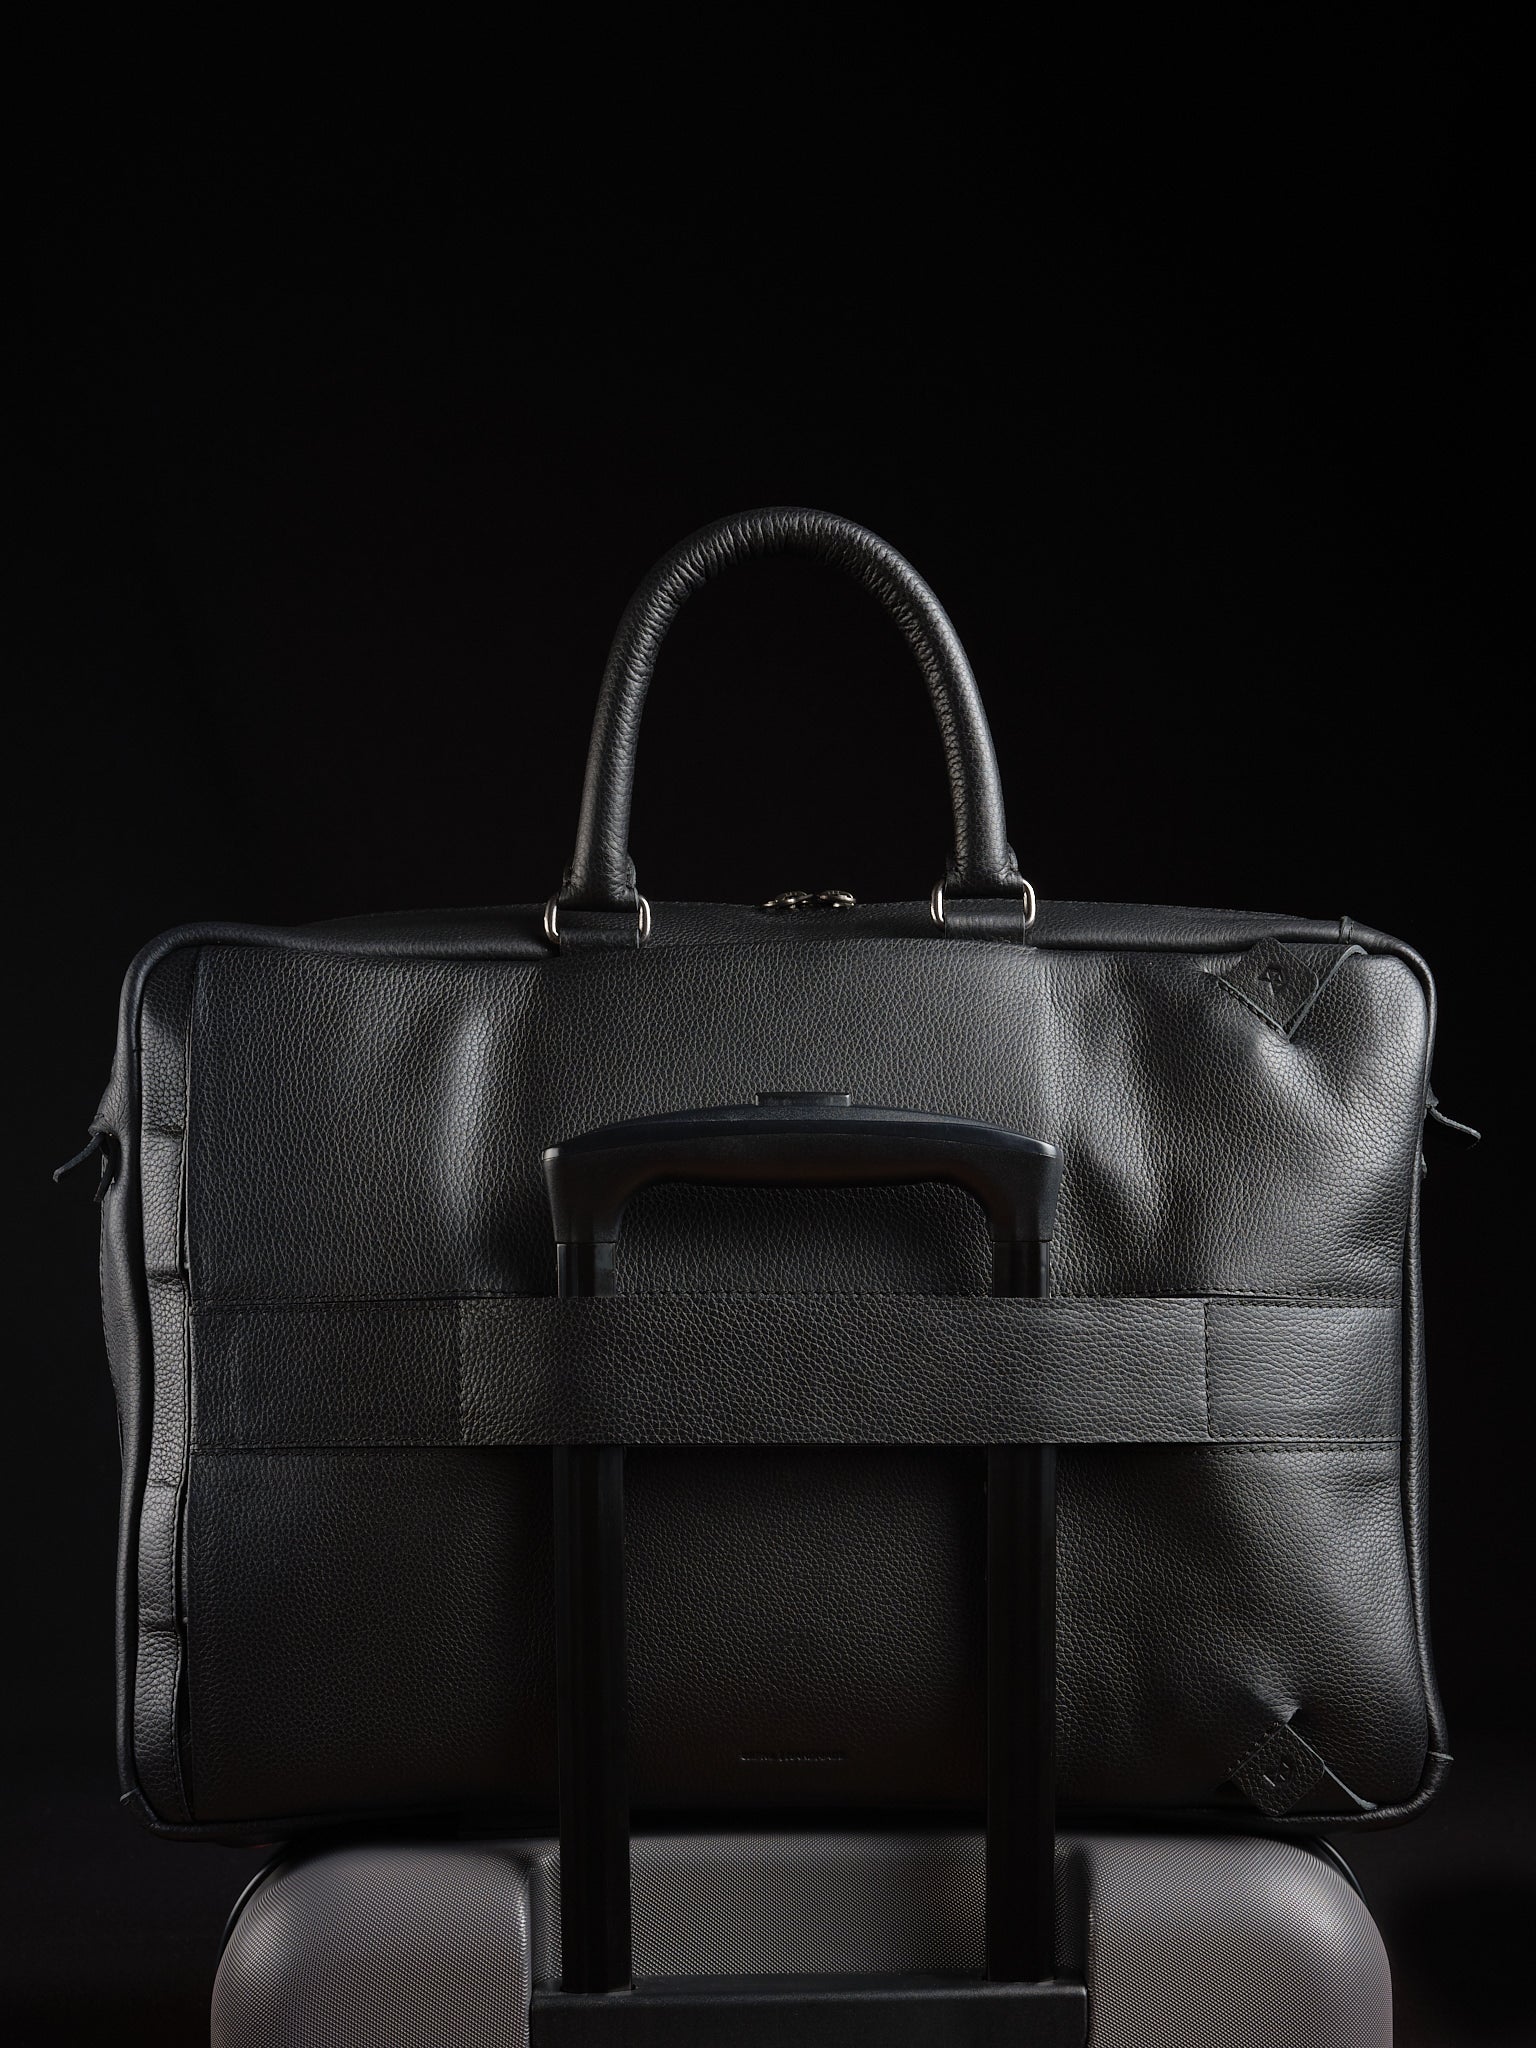 Extra Luggage Strap. Backpack Briefcase Leather Black by Capra